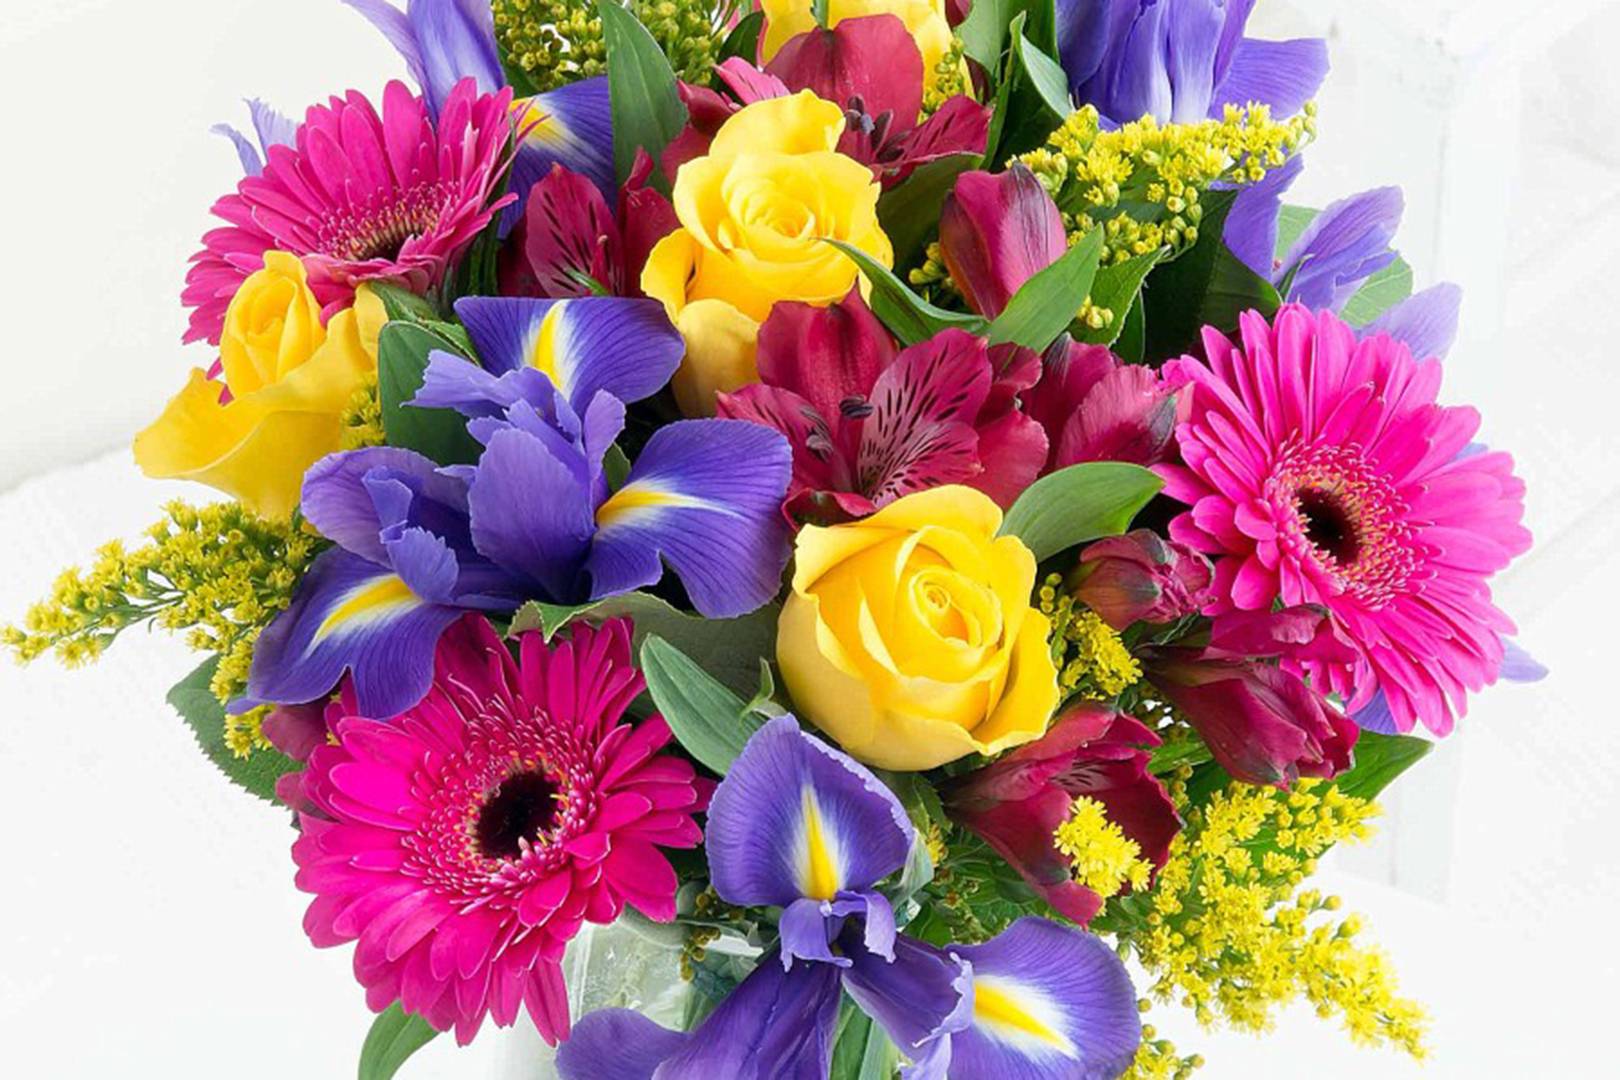 Cheap international flower delivery from uk